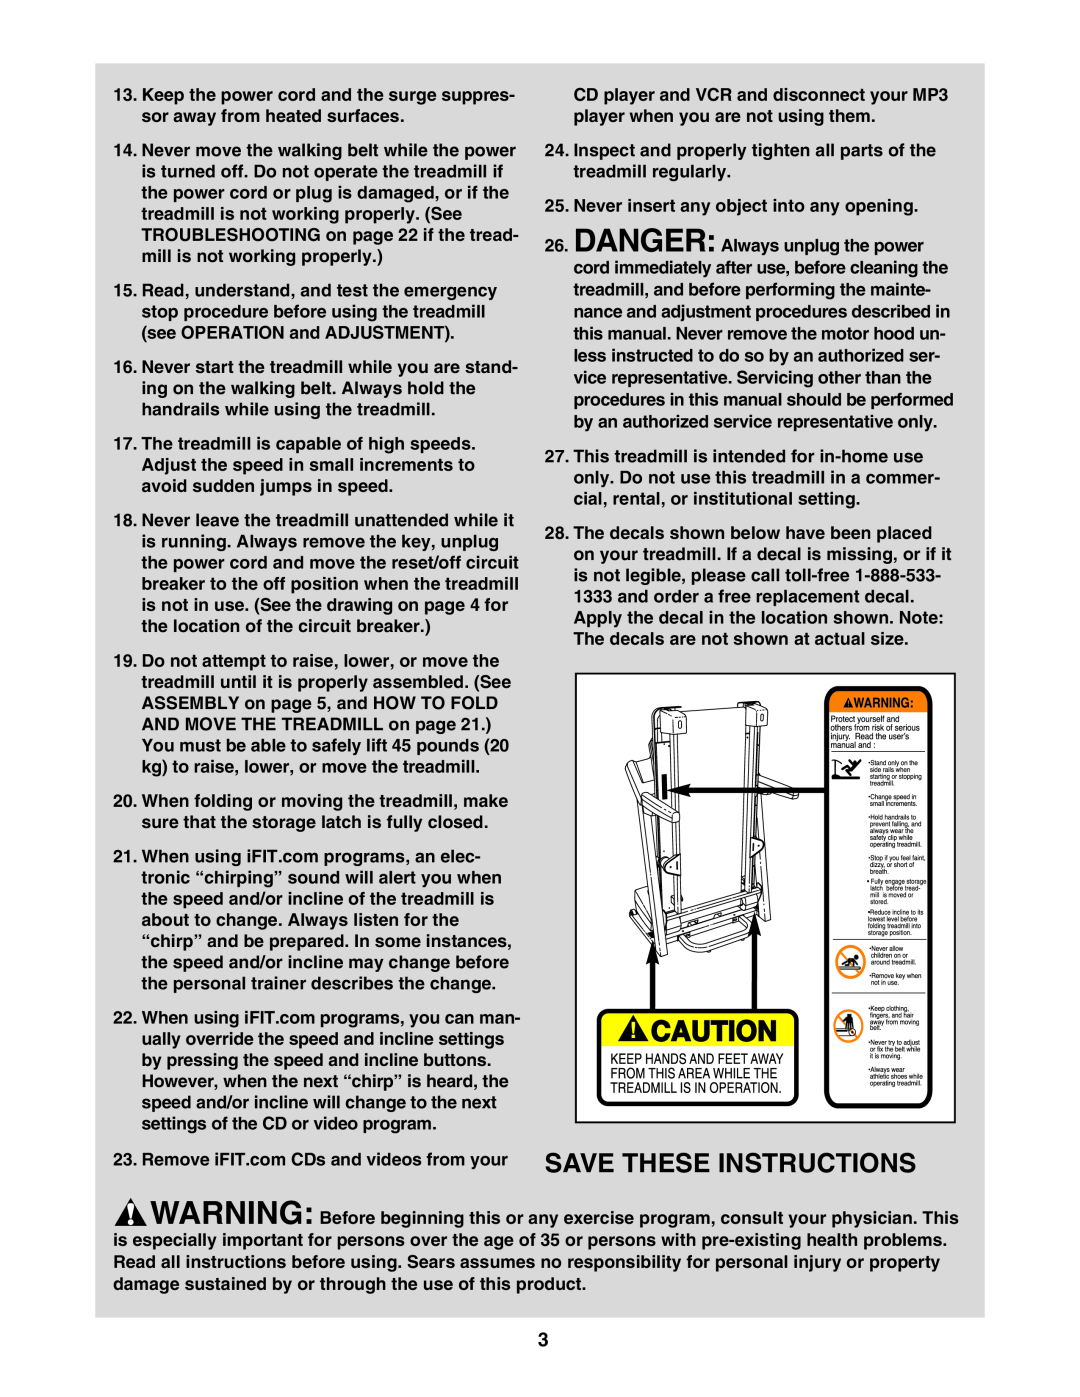 ProForm 831.29605.0 user manual Inspect and properly tighten all parts of the treadmill regularly, Save These Instructions 